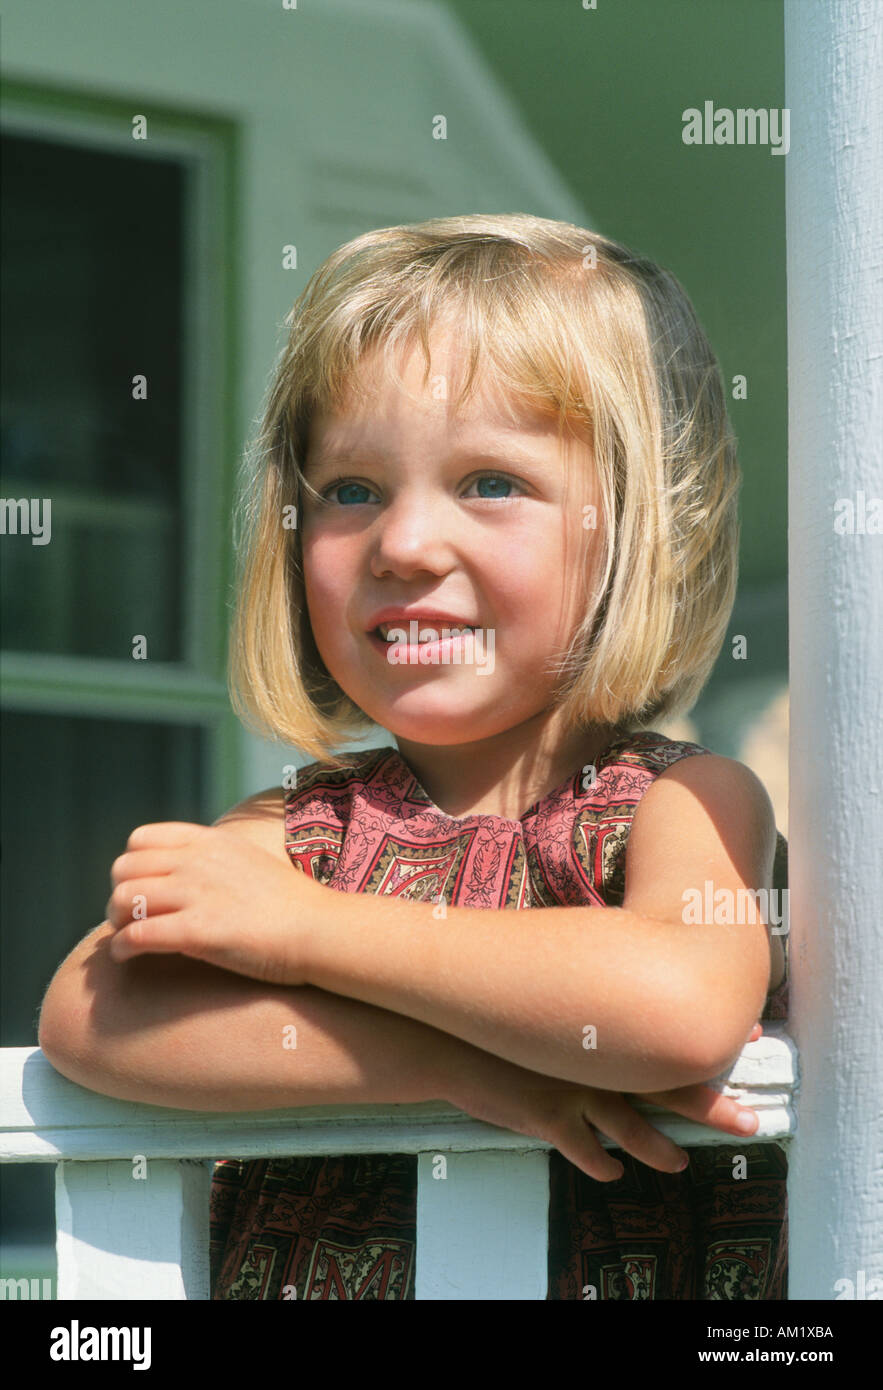 Young blonde girl leaning on porch railing Stock Photo